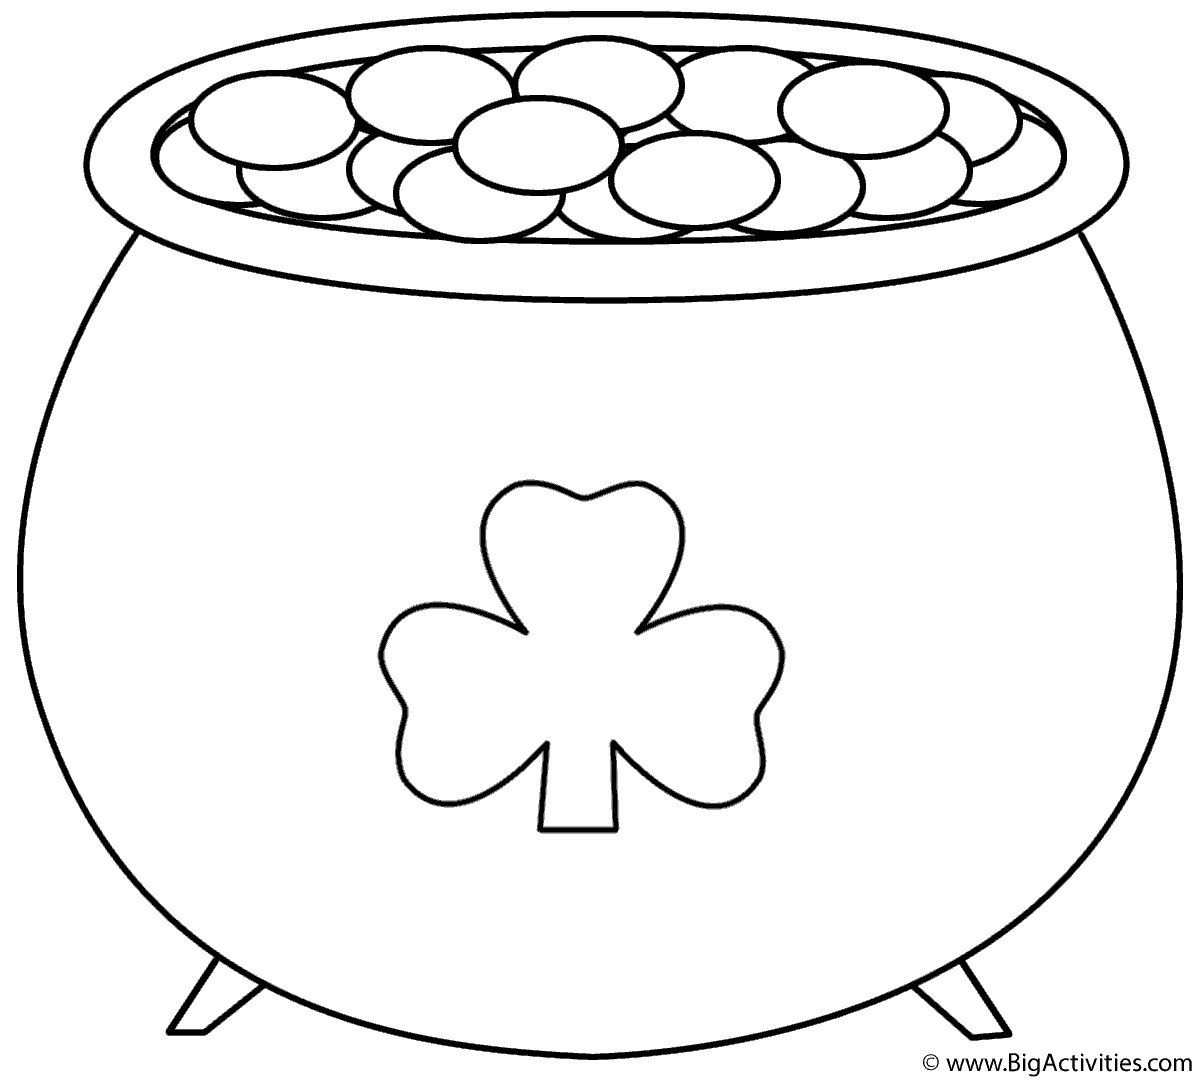 pot-of-gold-with-shamrock-2-coloring-page-st-patrick-s-day